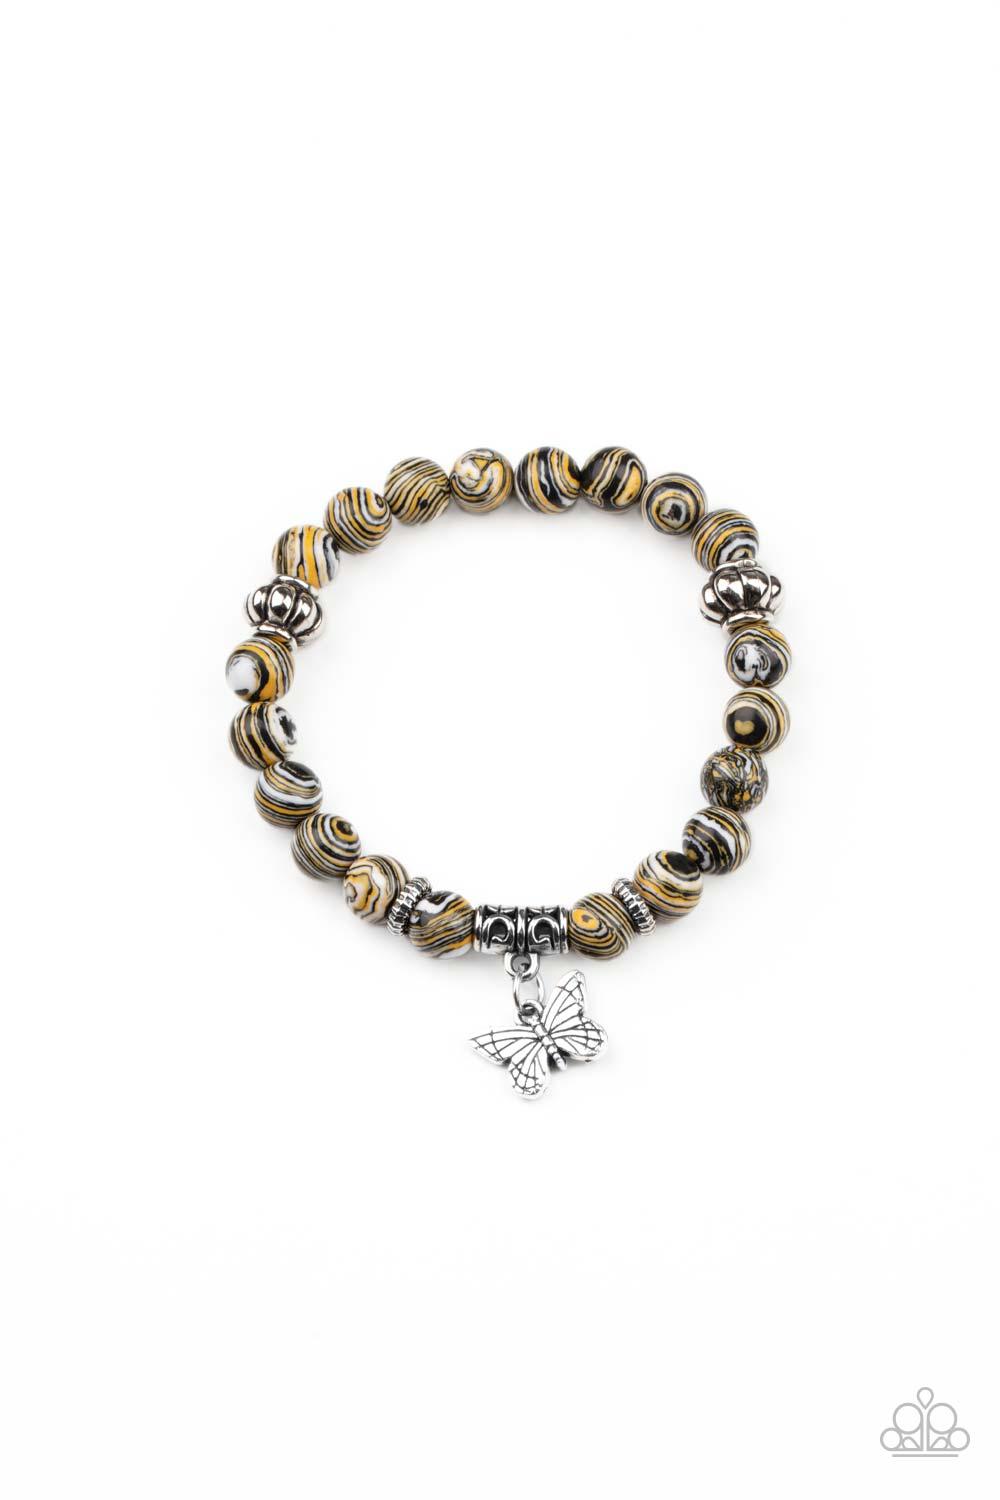 Paparazzi Accessories Butterfly Wishes - Yellow Swirling with yellow, black, and white accents, colorful stone beads and ornate silver accents are threaded along stretchy bands around the wrist. A dainty silver butterfly charm dangles from the display, ad